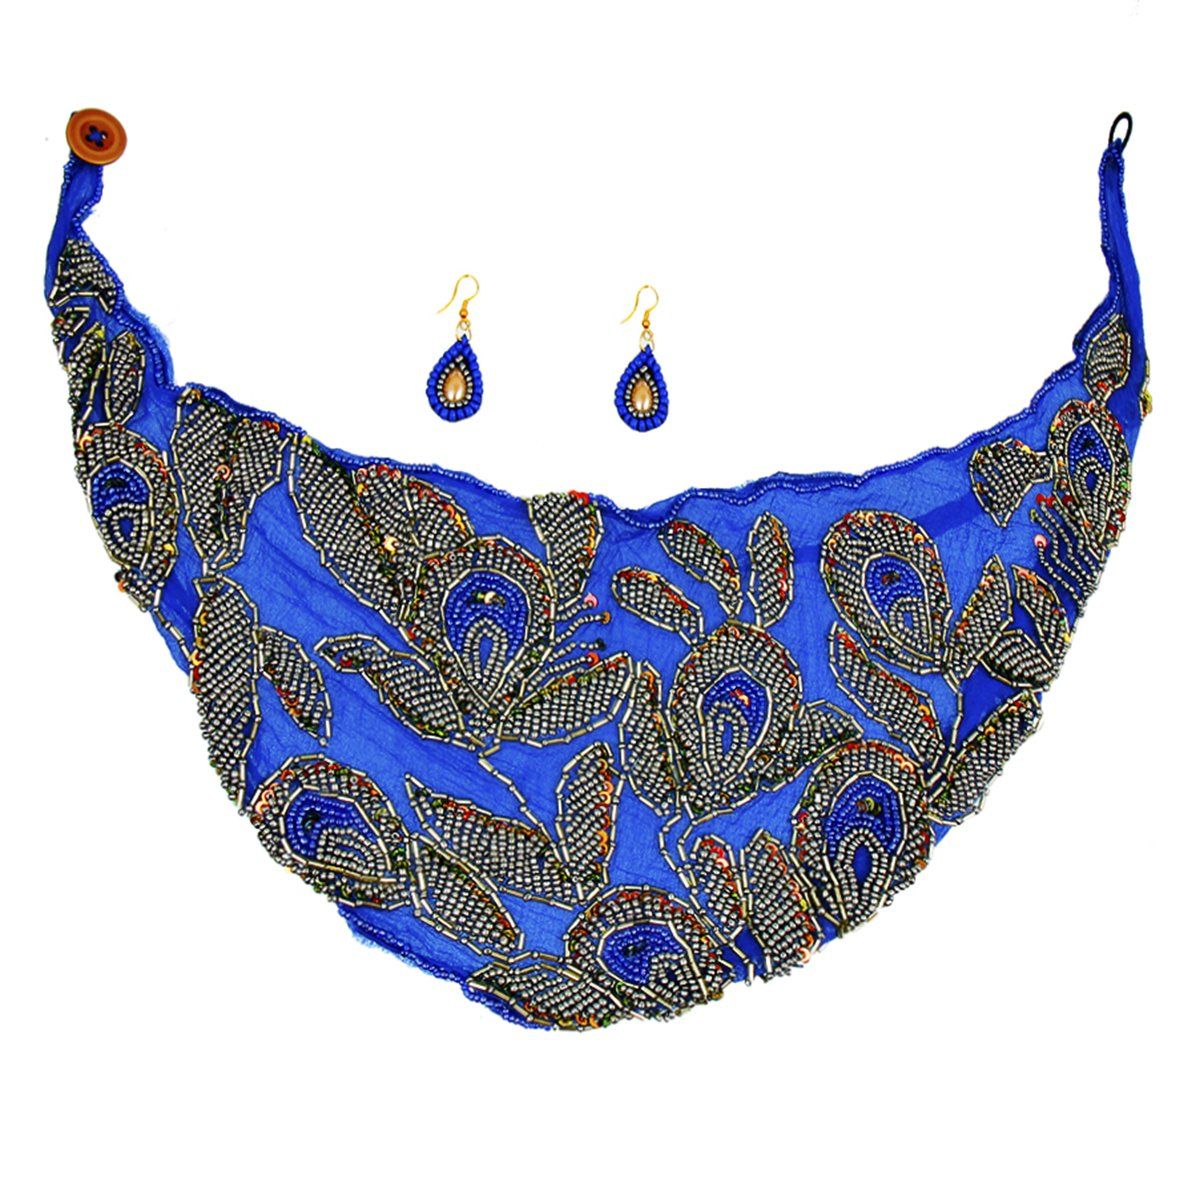 Handmade Blue Chiffon Scarf Necklace Set with Embroidered Beads and Sequins